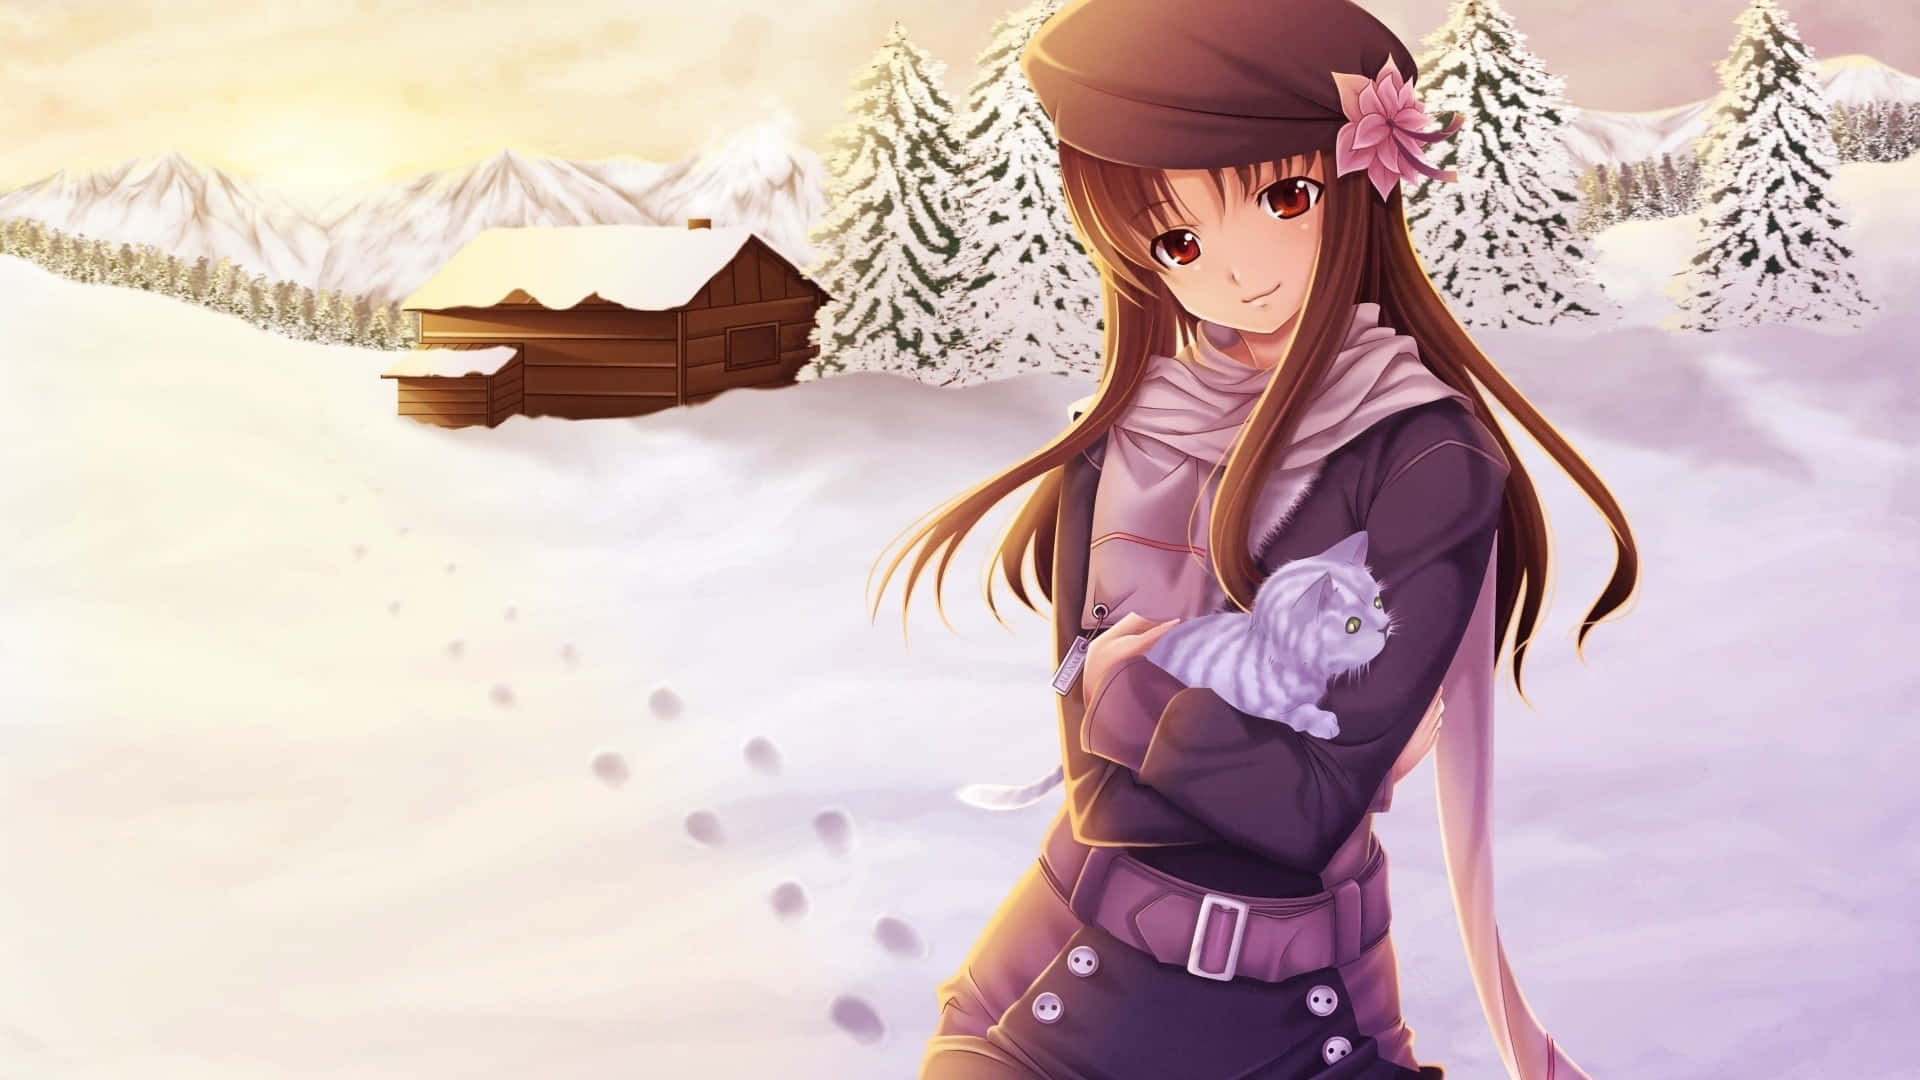 "The beauty of Kanon's natural landscapes" Wallpaper